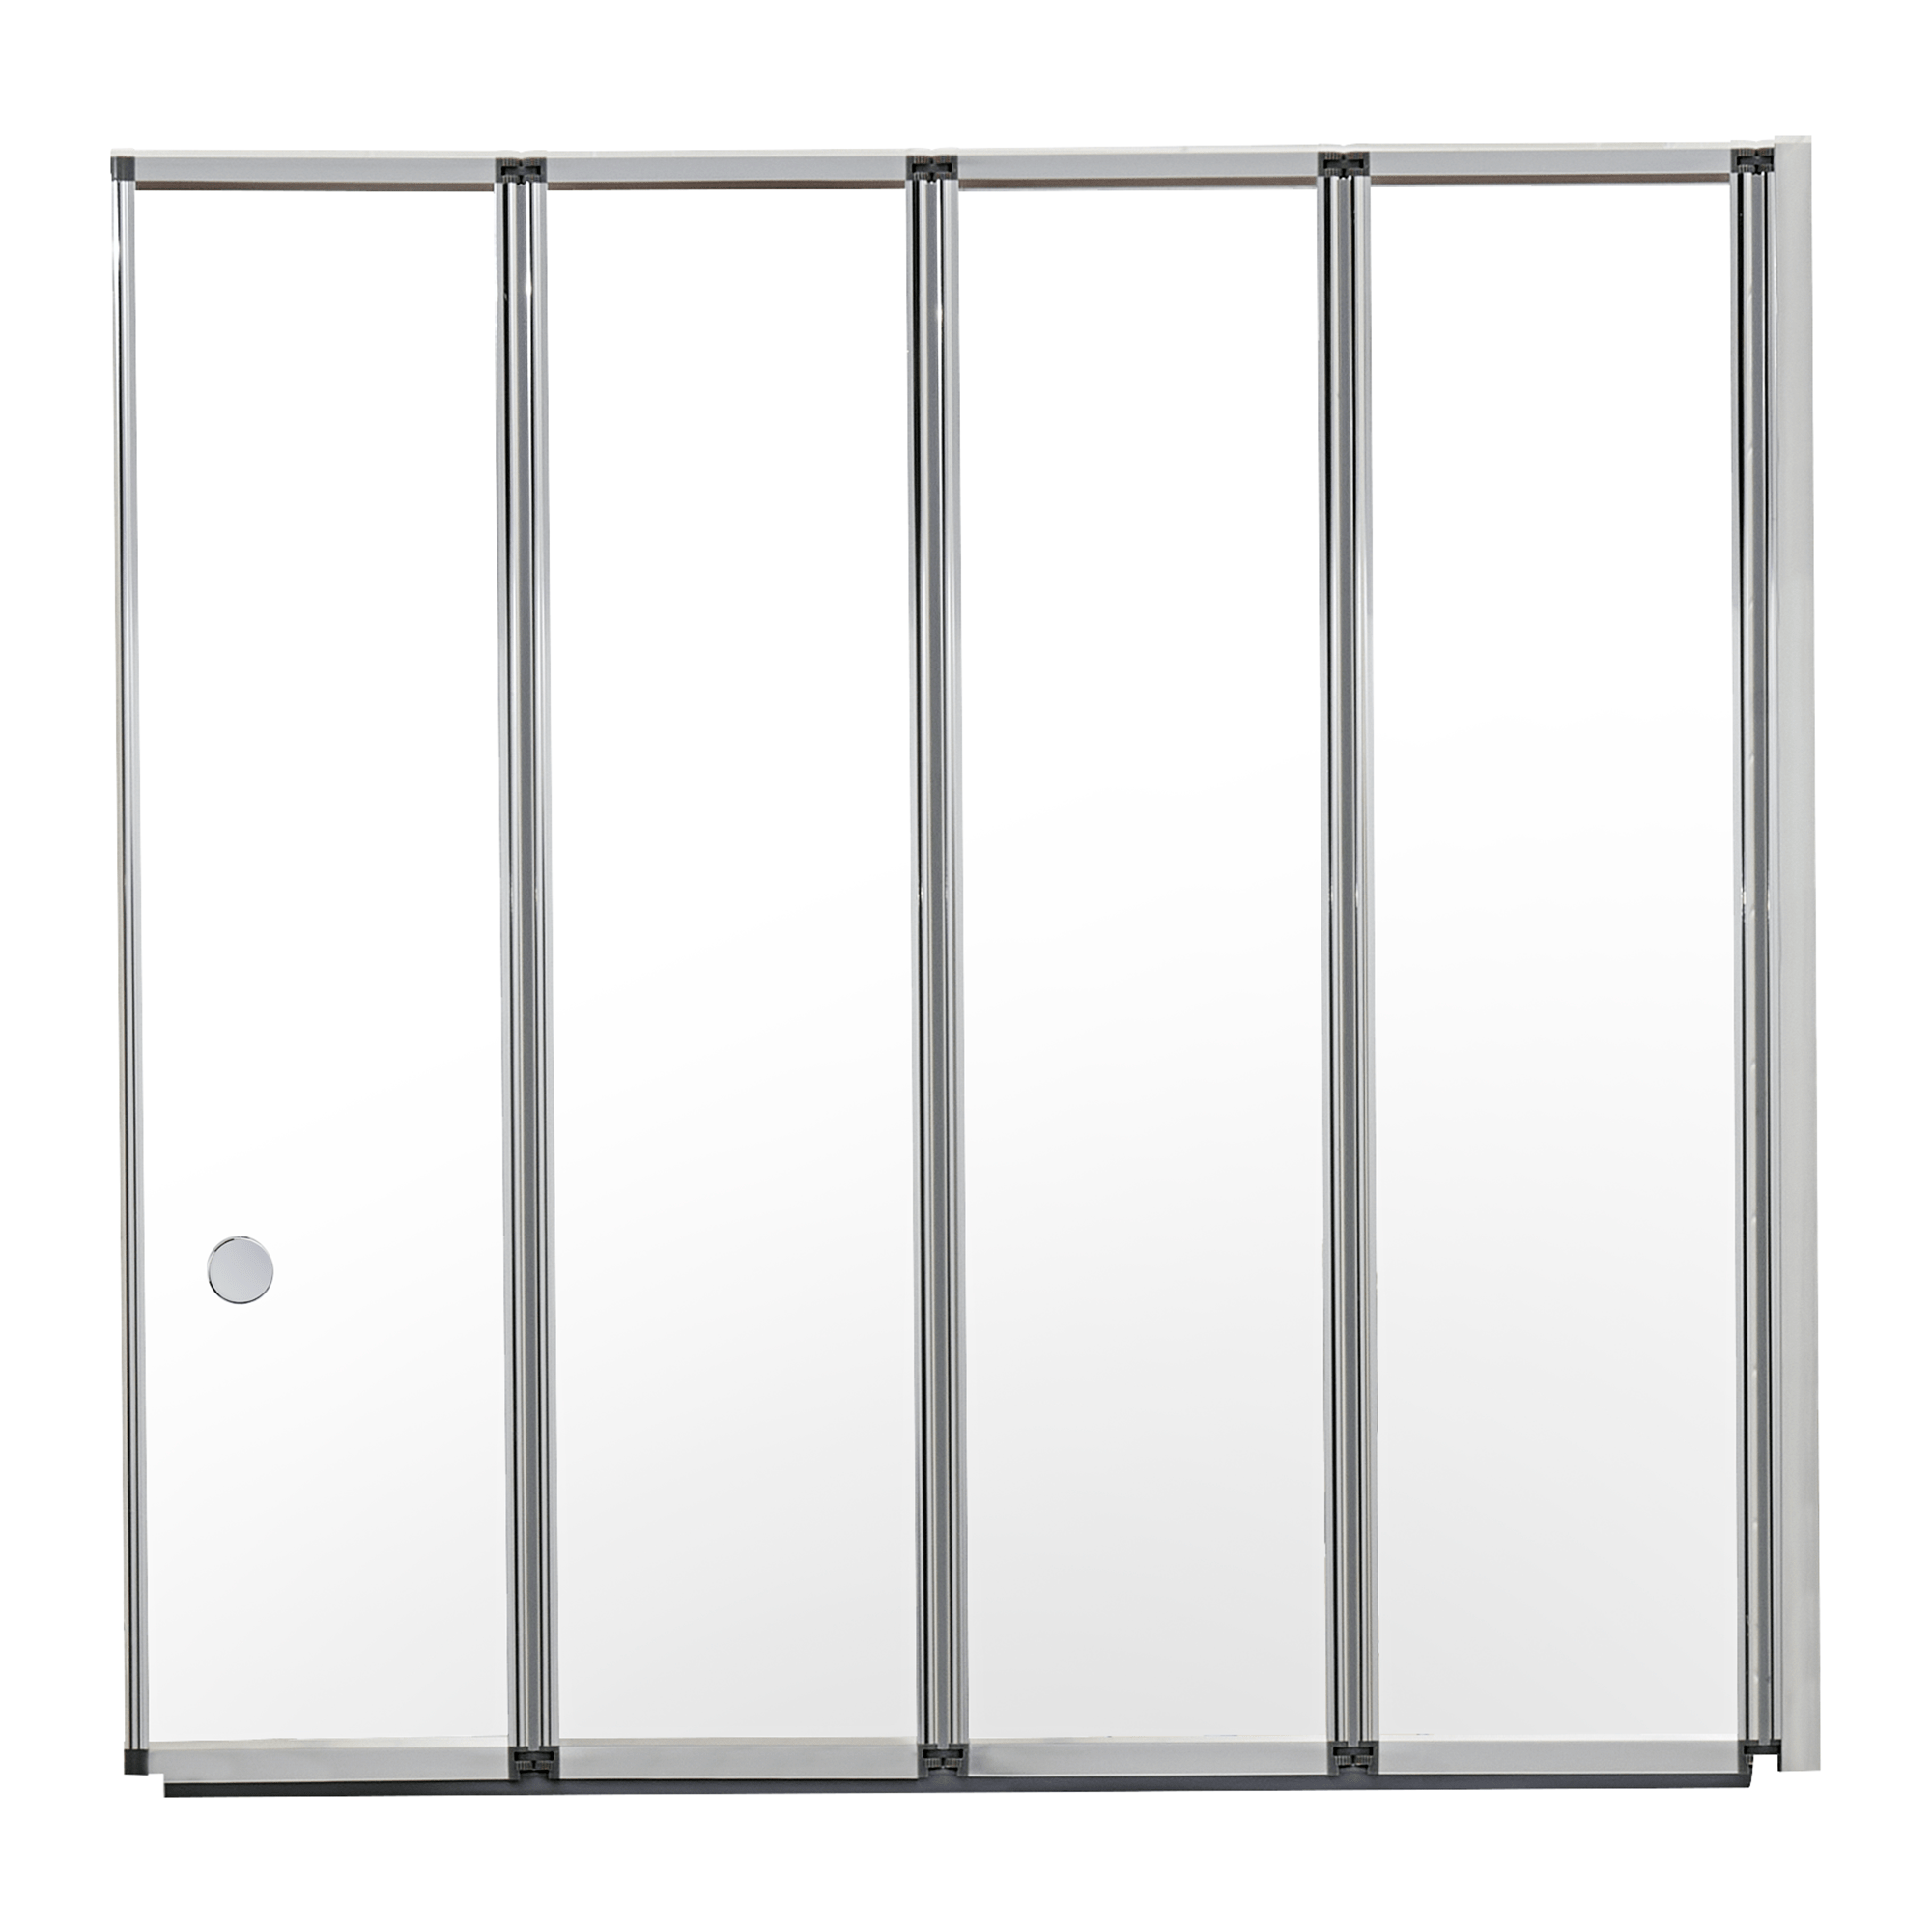 ELLA'S BUBBLES 4-Fold Tempered Glass Shower Screen Bath Screen for Walk-In Tubs